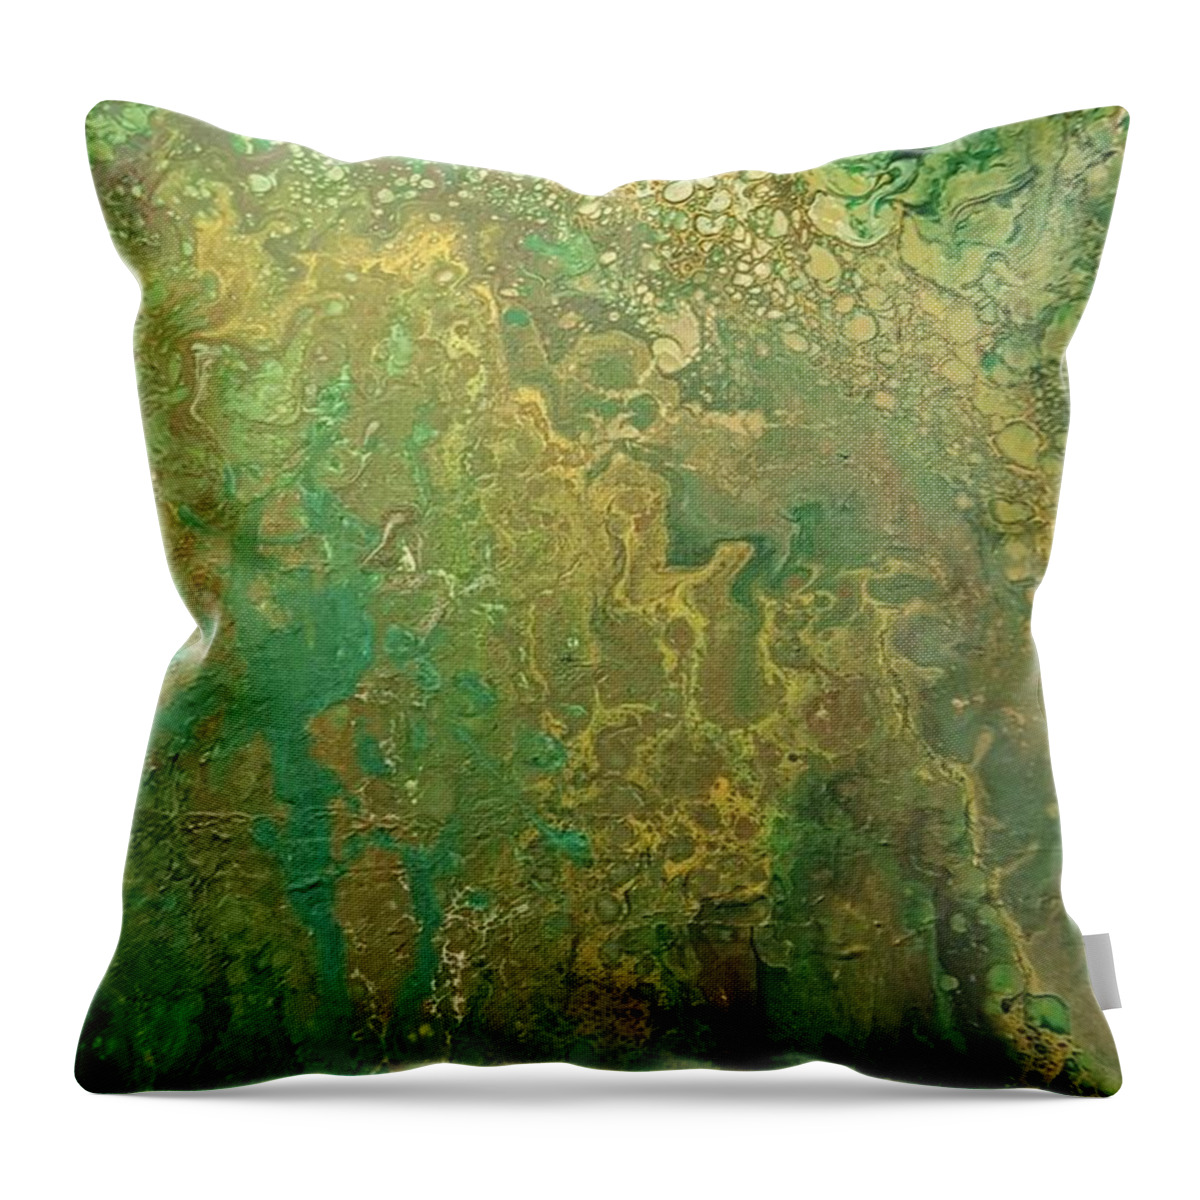 #acrylicdirtypour #abstractacrylics #coolart #paintingswithgreenandgold #acrylicart #abstractartforsale #camvasartprints #originalartforsale #abstractartpaintings Throw Pillow featuring the painting Acrylic Dirty Pour with Greens browns gold copper by Cynthia Silverman